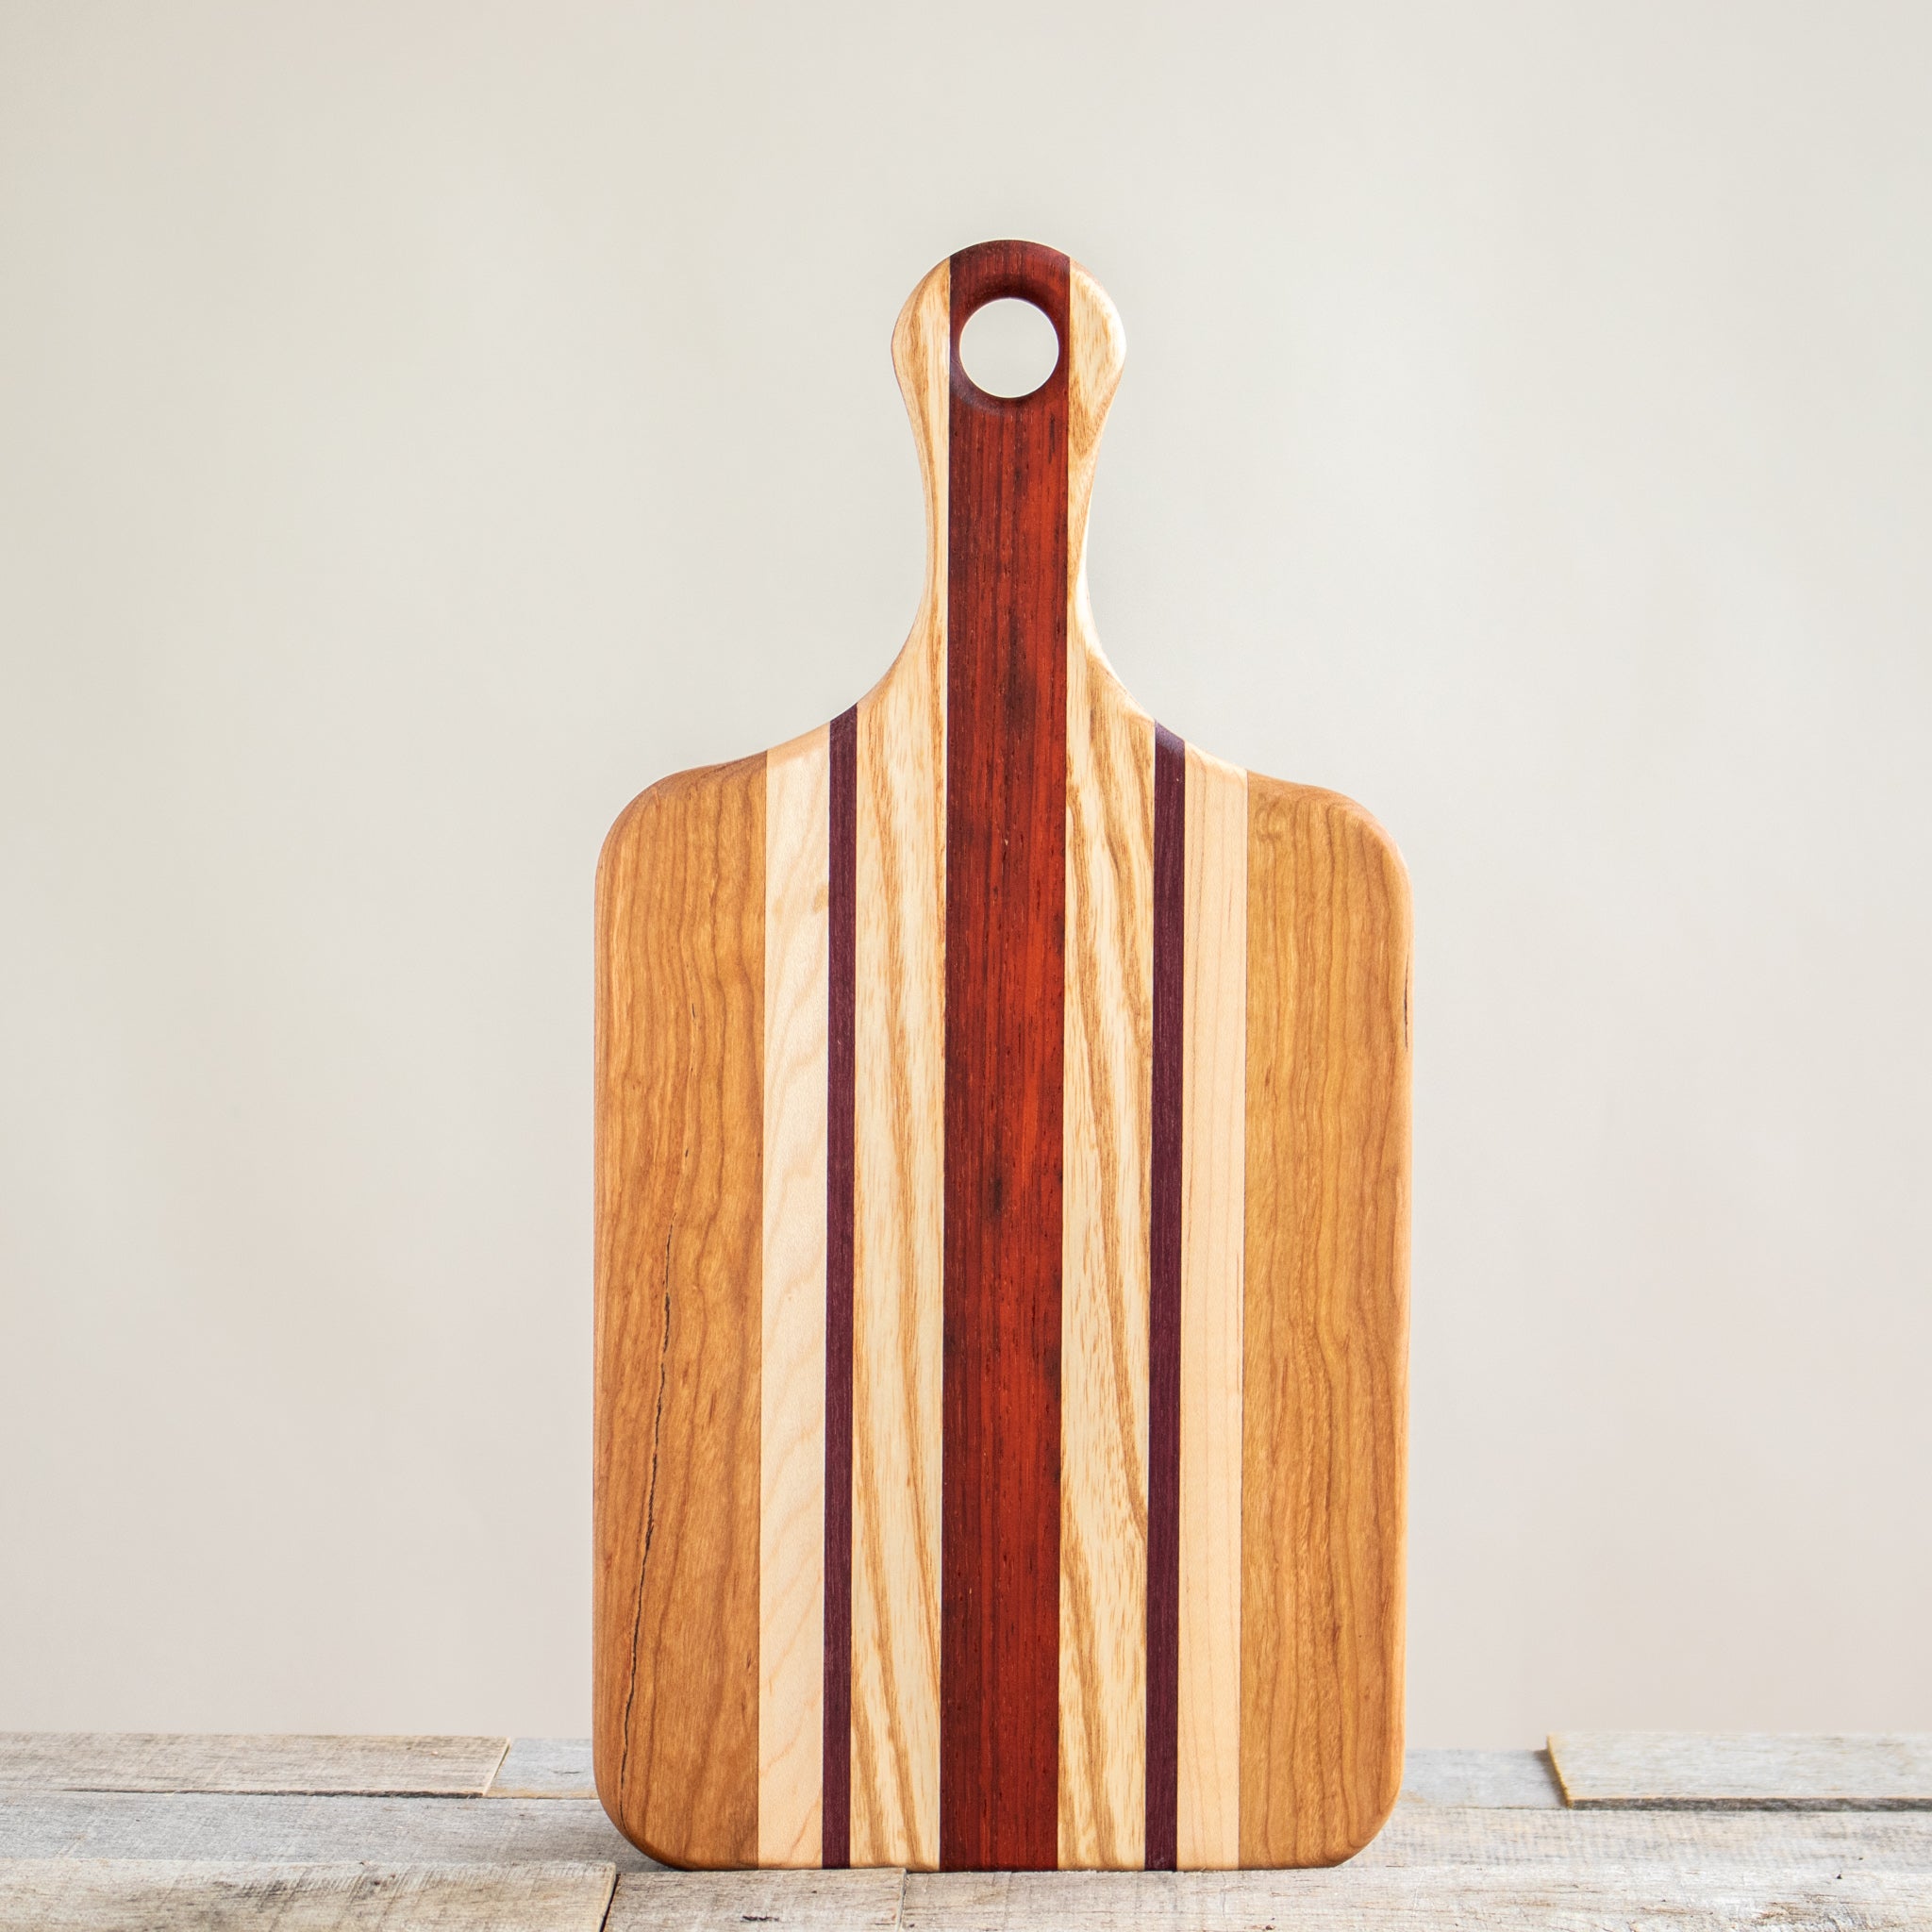 How to Make a Large Wooden Serving Board With a Handle